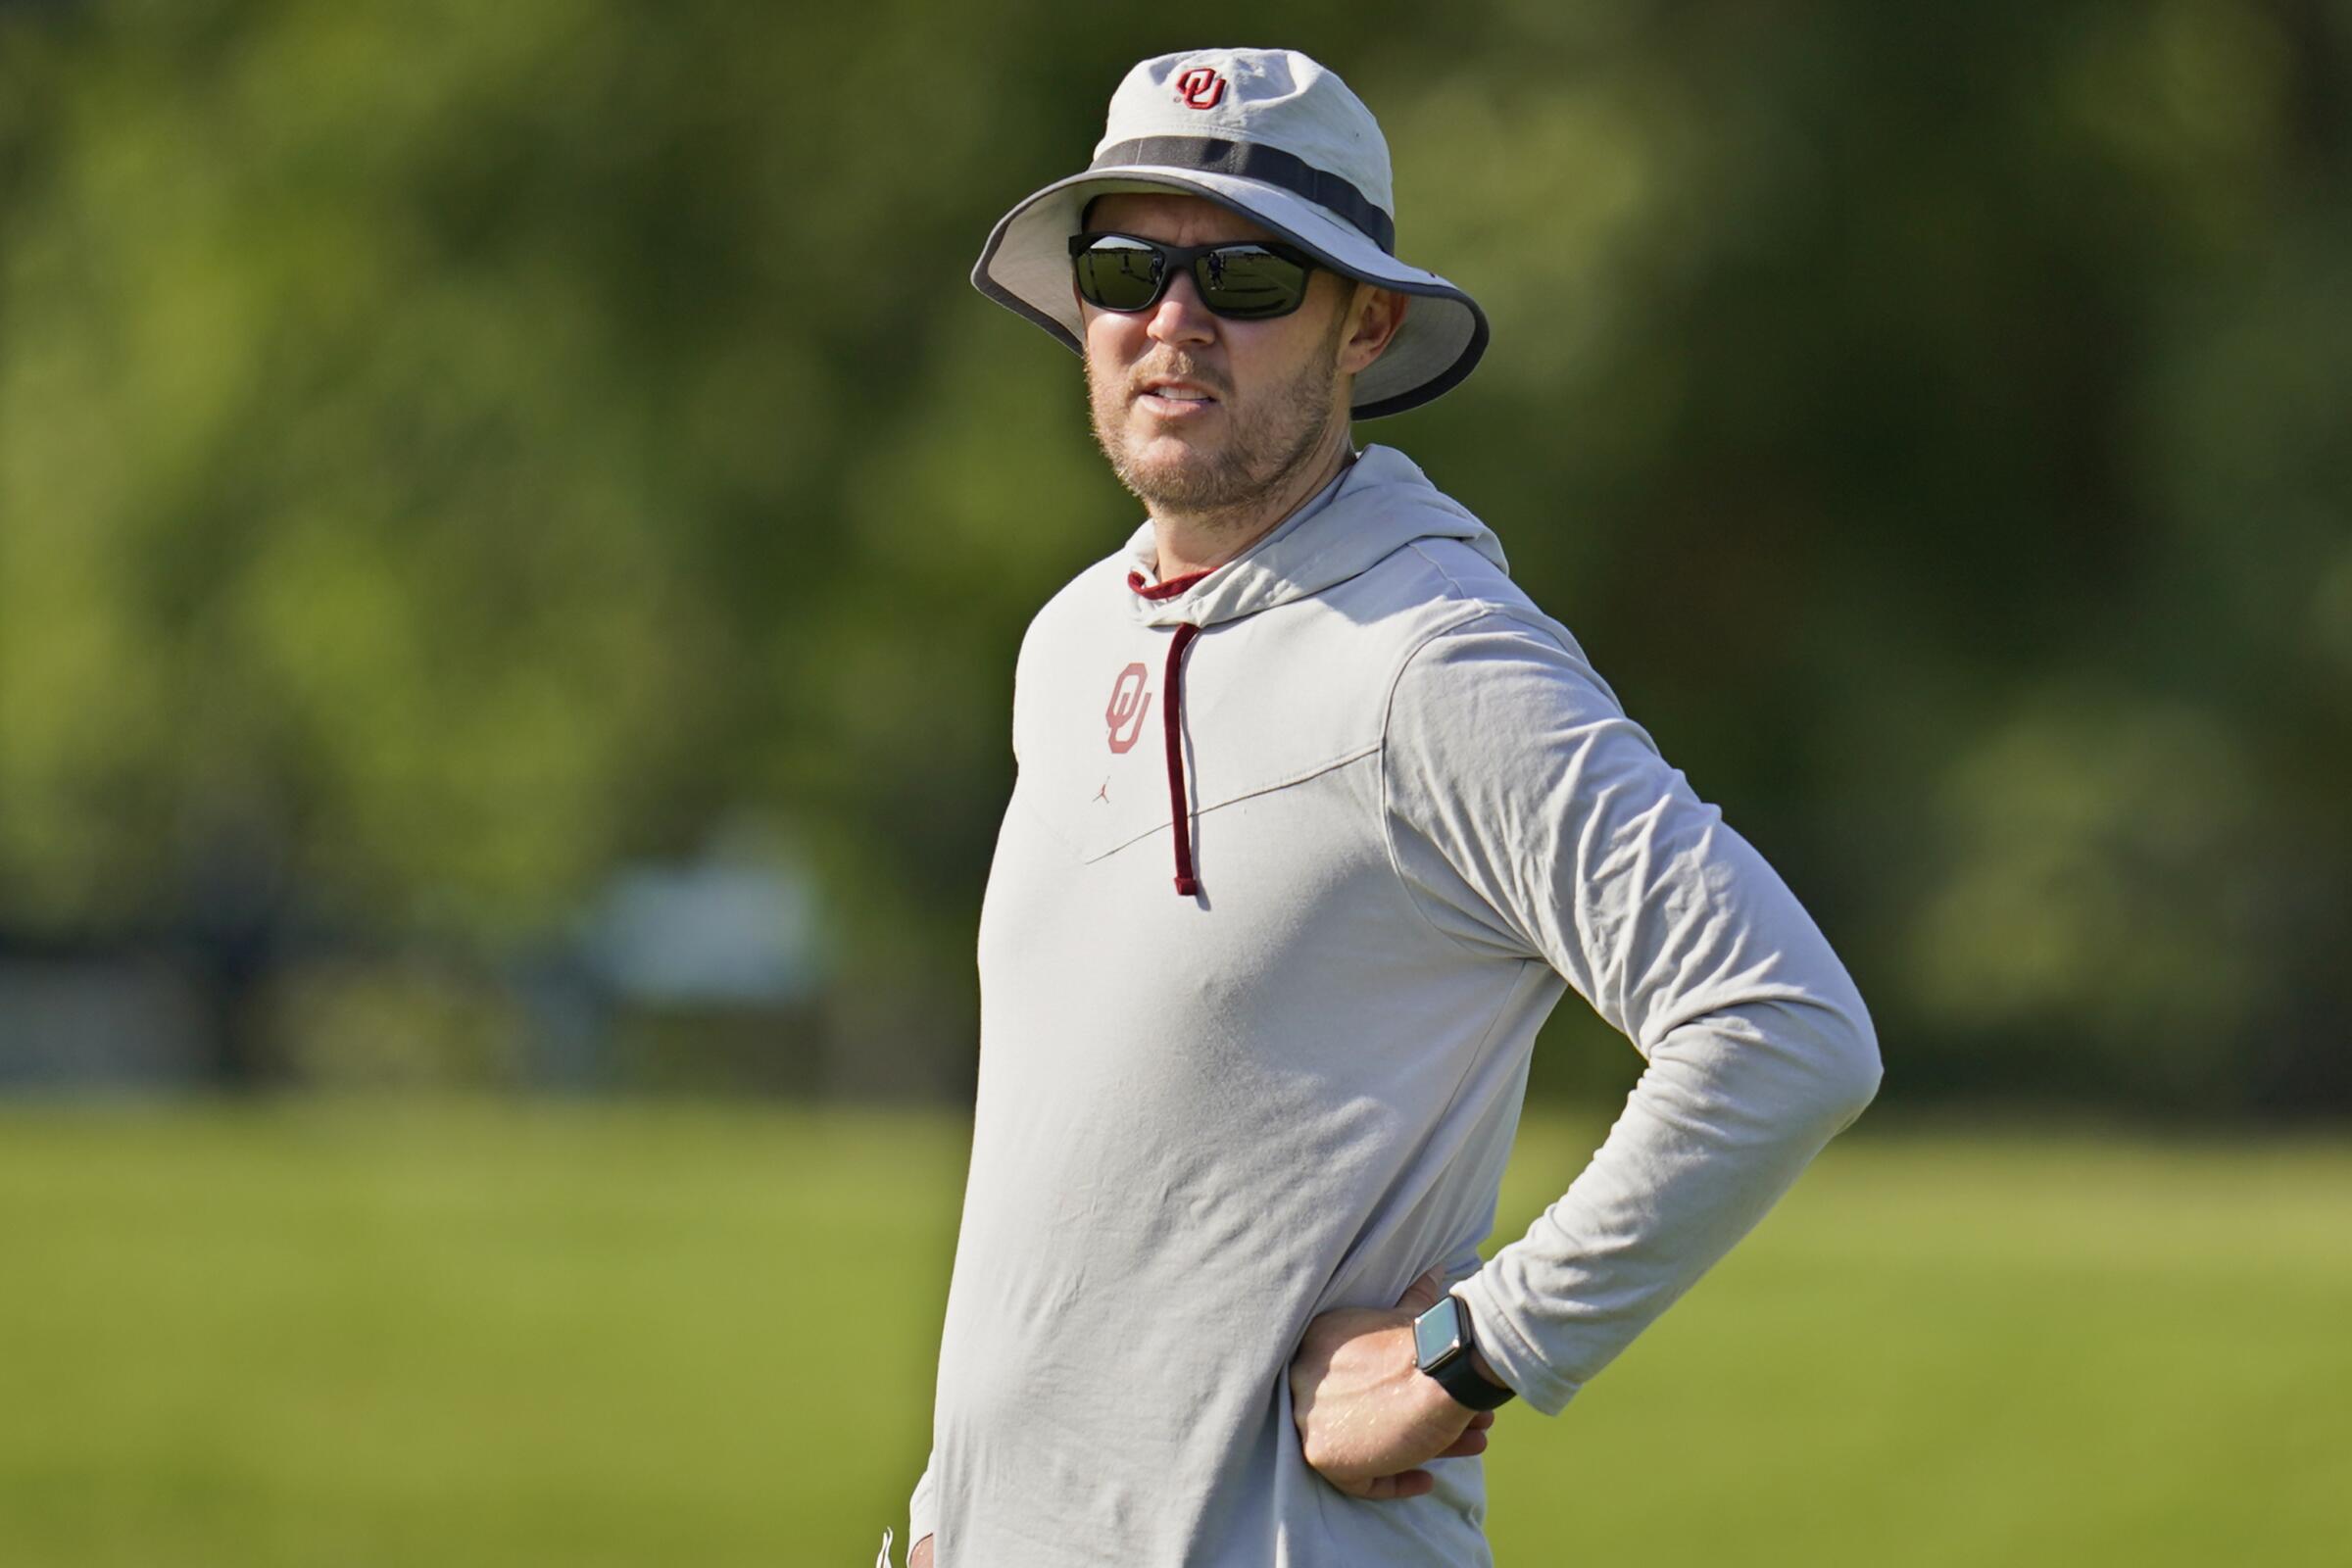 Oklahoma coach Lincoln Riley watches during practice Aug. 10 in Norman, Okla.